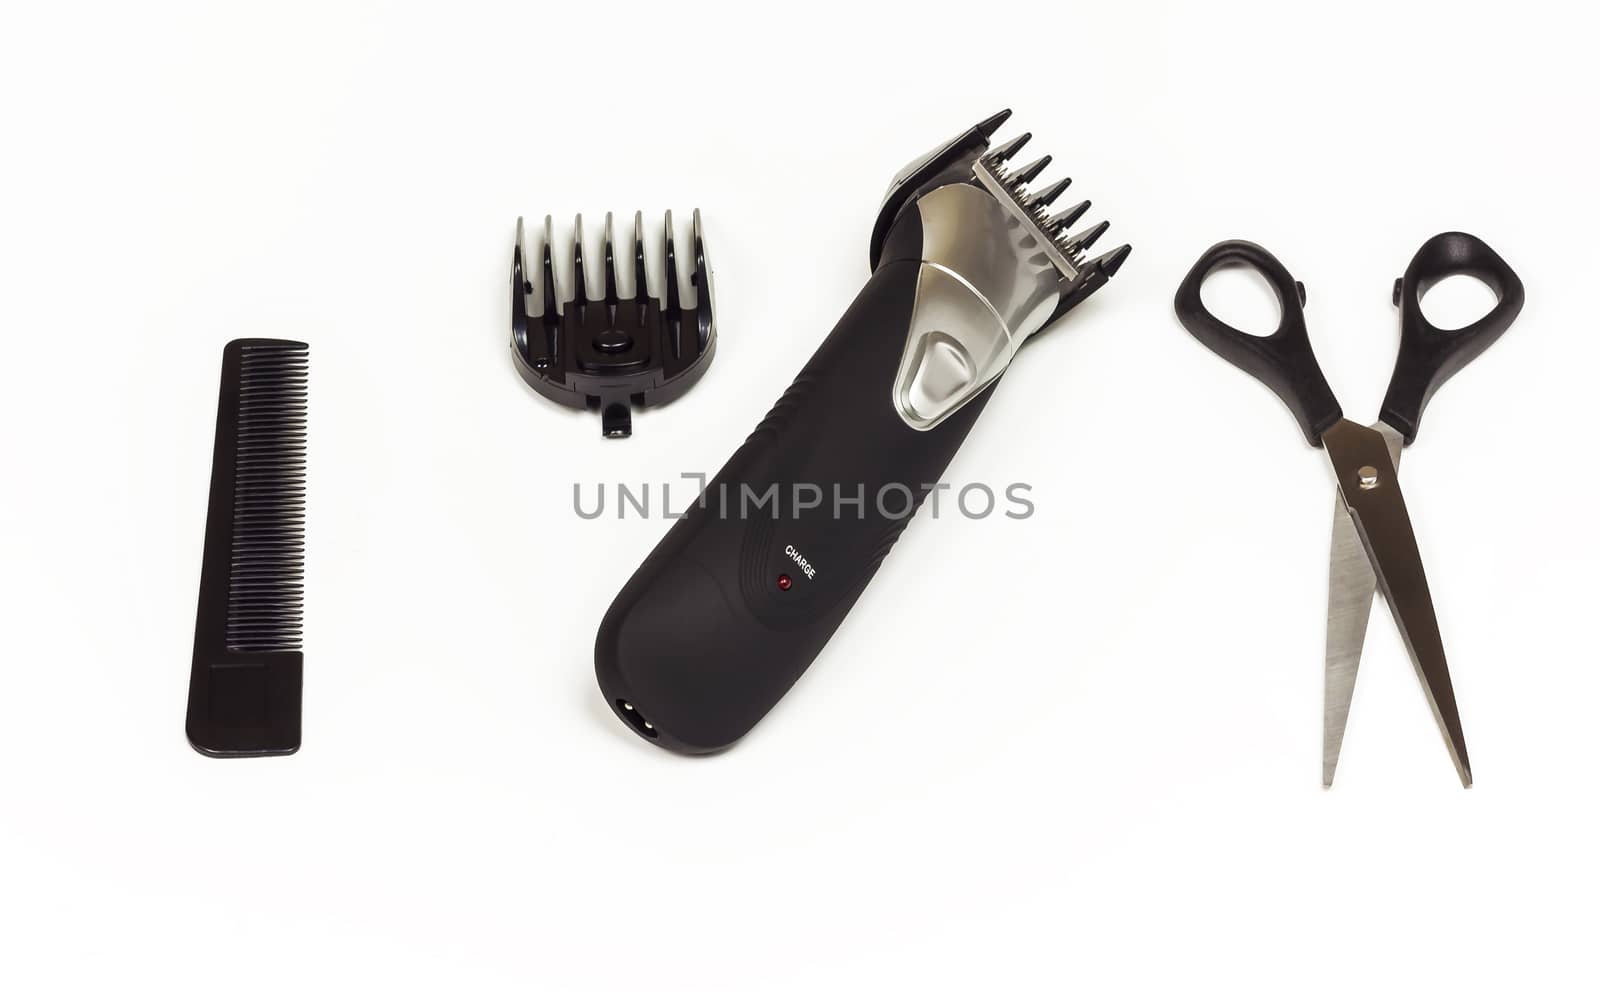 Hair clipper with nozzle, scissors and comb by Grommik